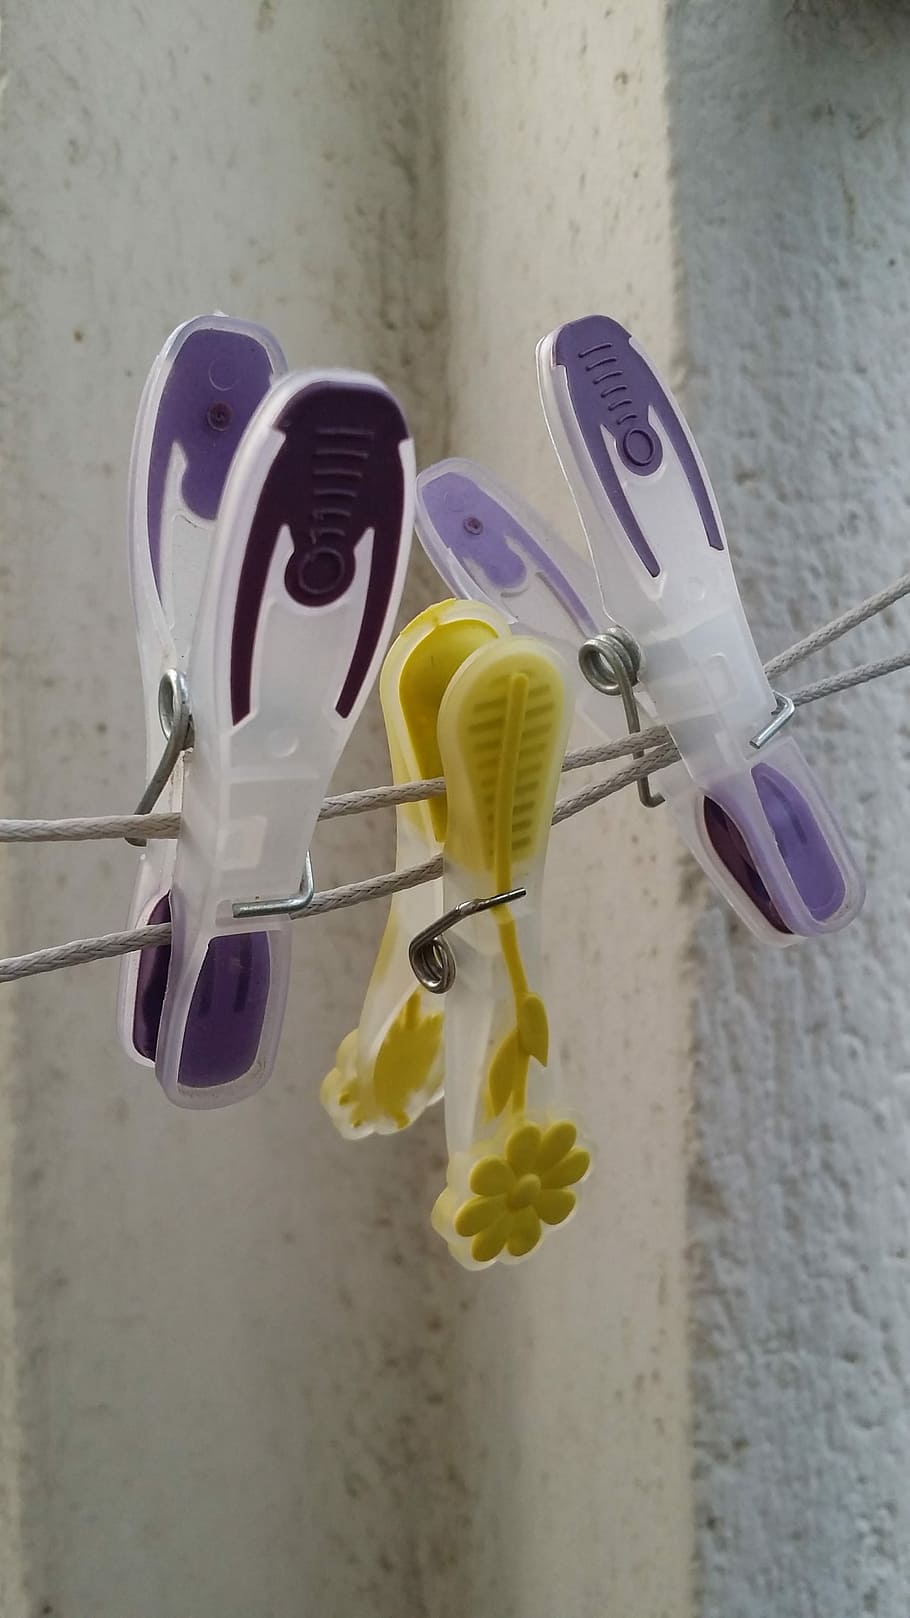 Clothing, Rope, Tweezers, Order, Lilac, yellow, indoors, close-up, day, still life